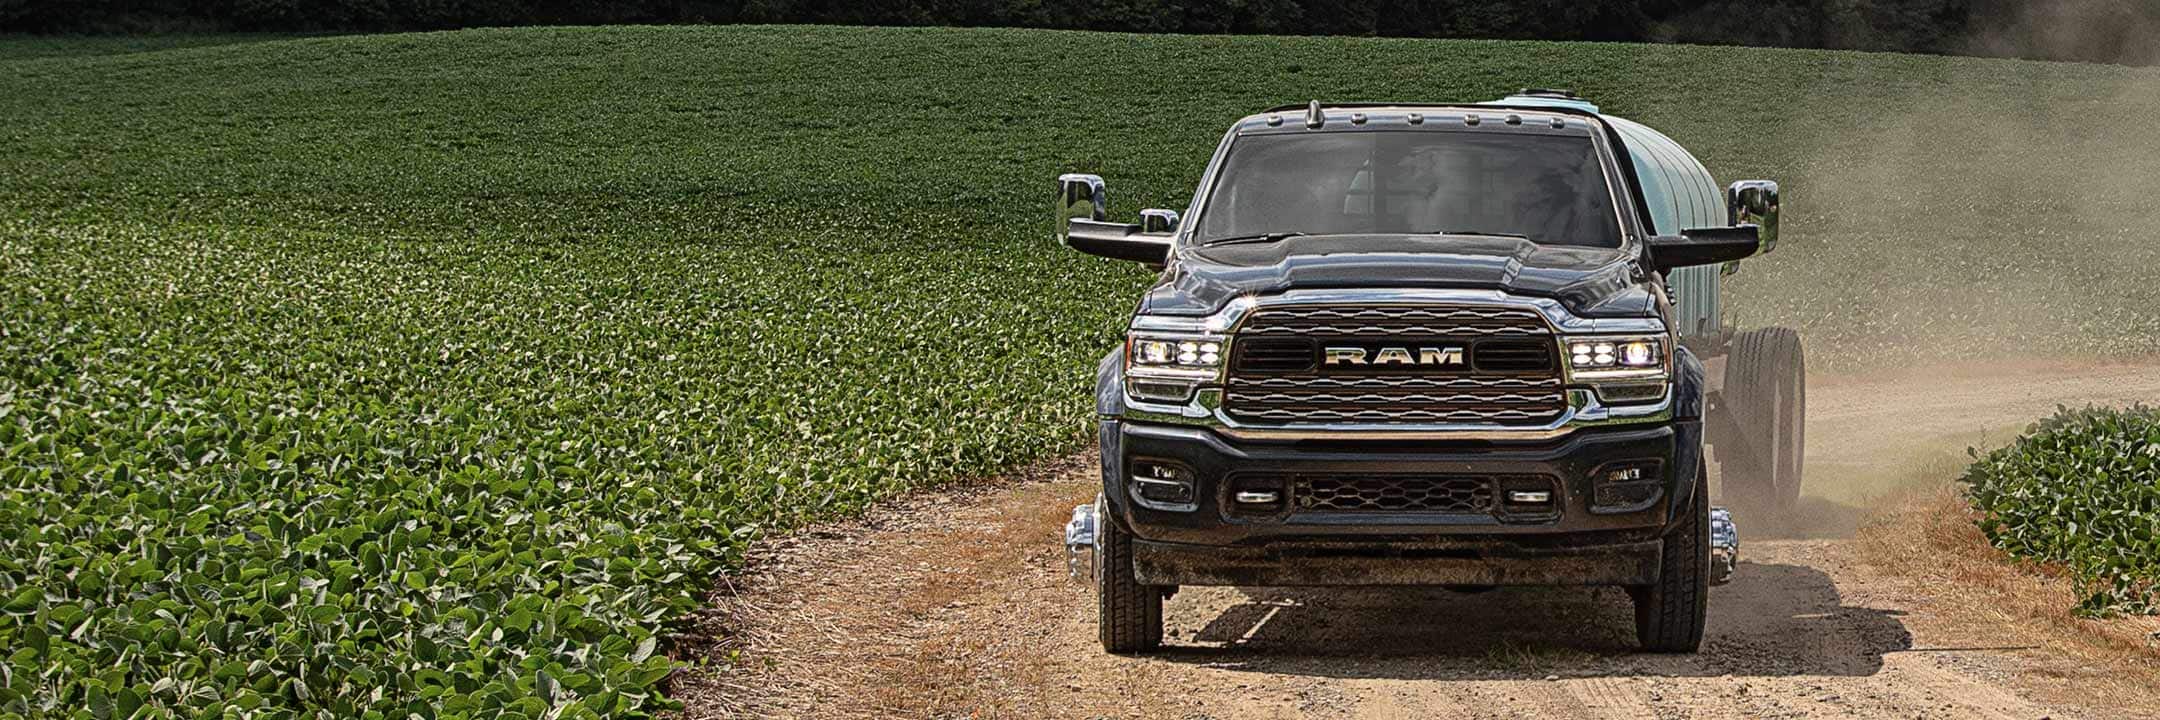 The 2022 Ram Chassis Cab carrying a water tank and being driven on a dirt road through green fields.